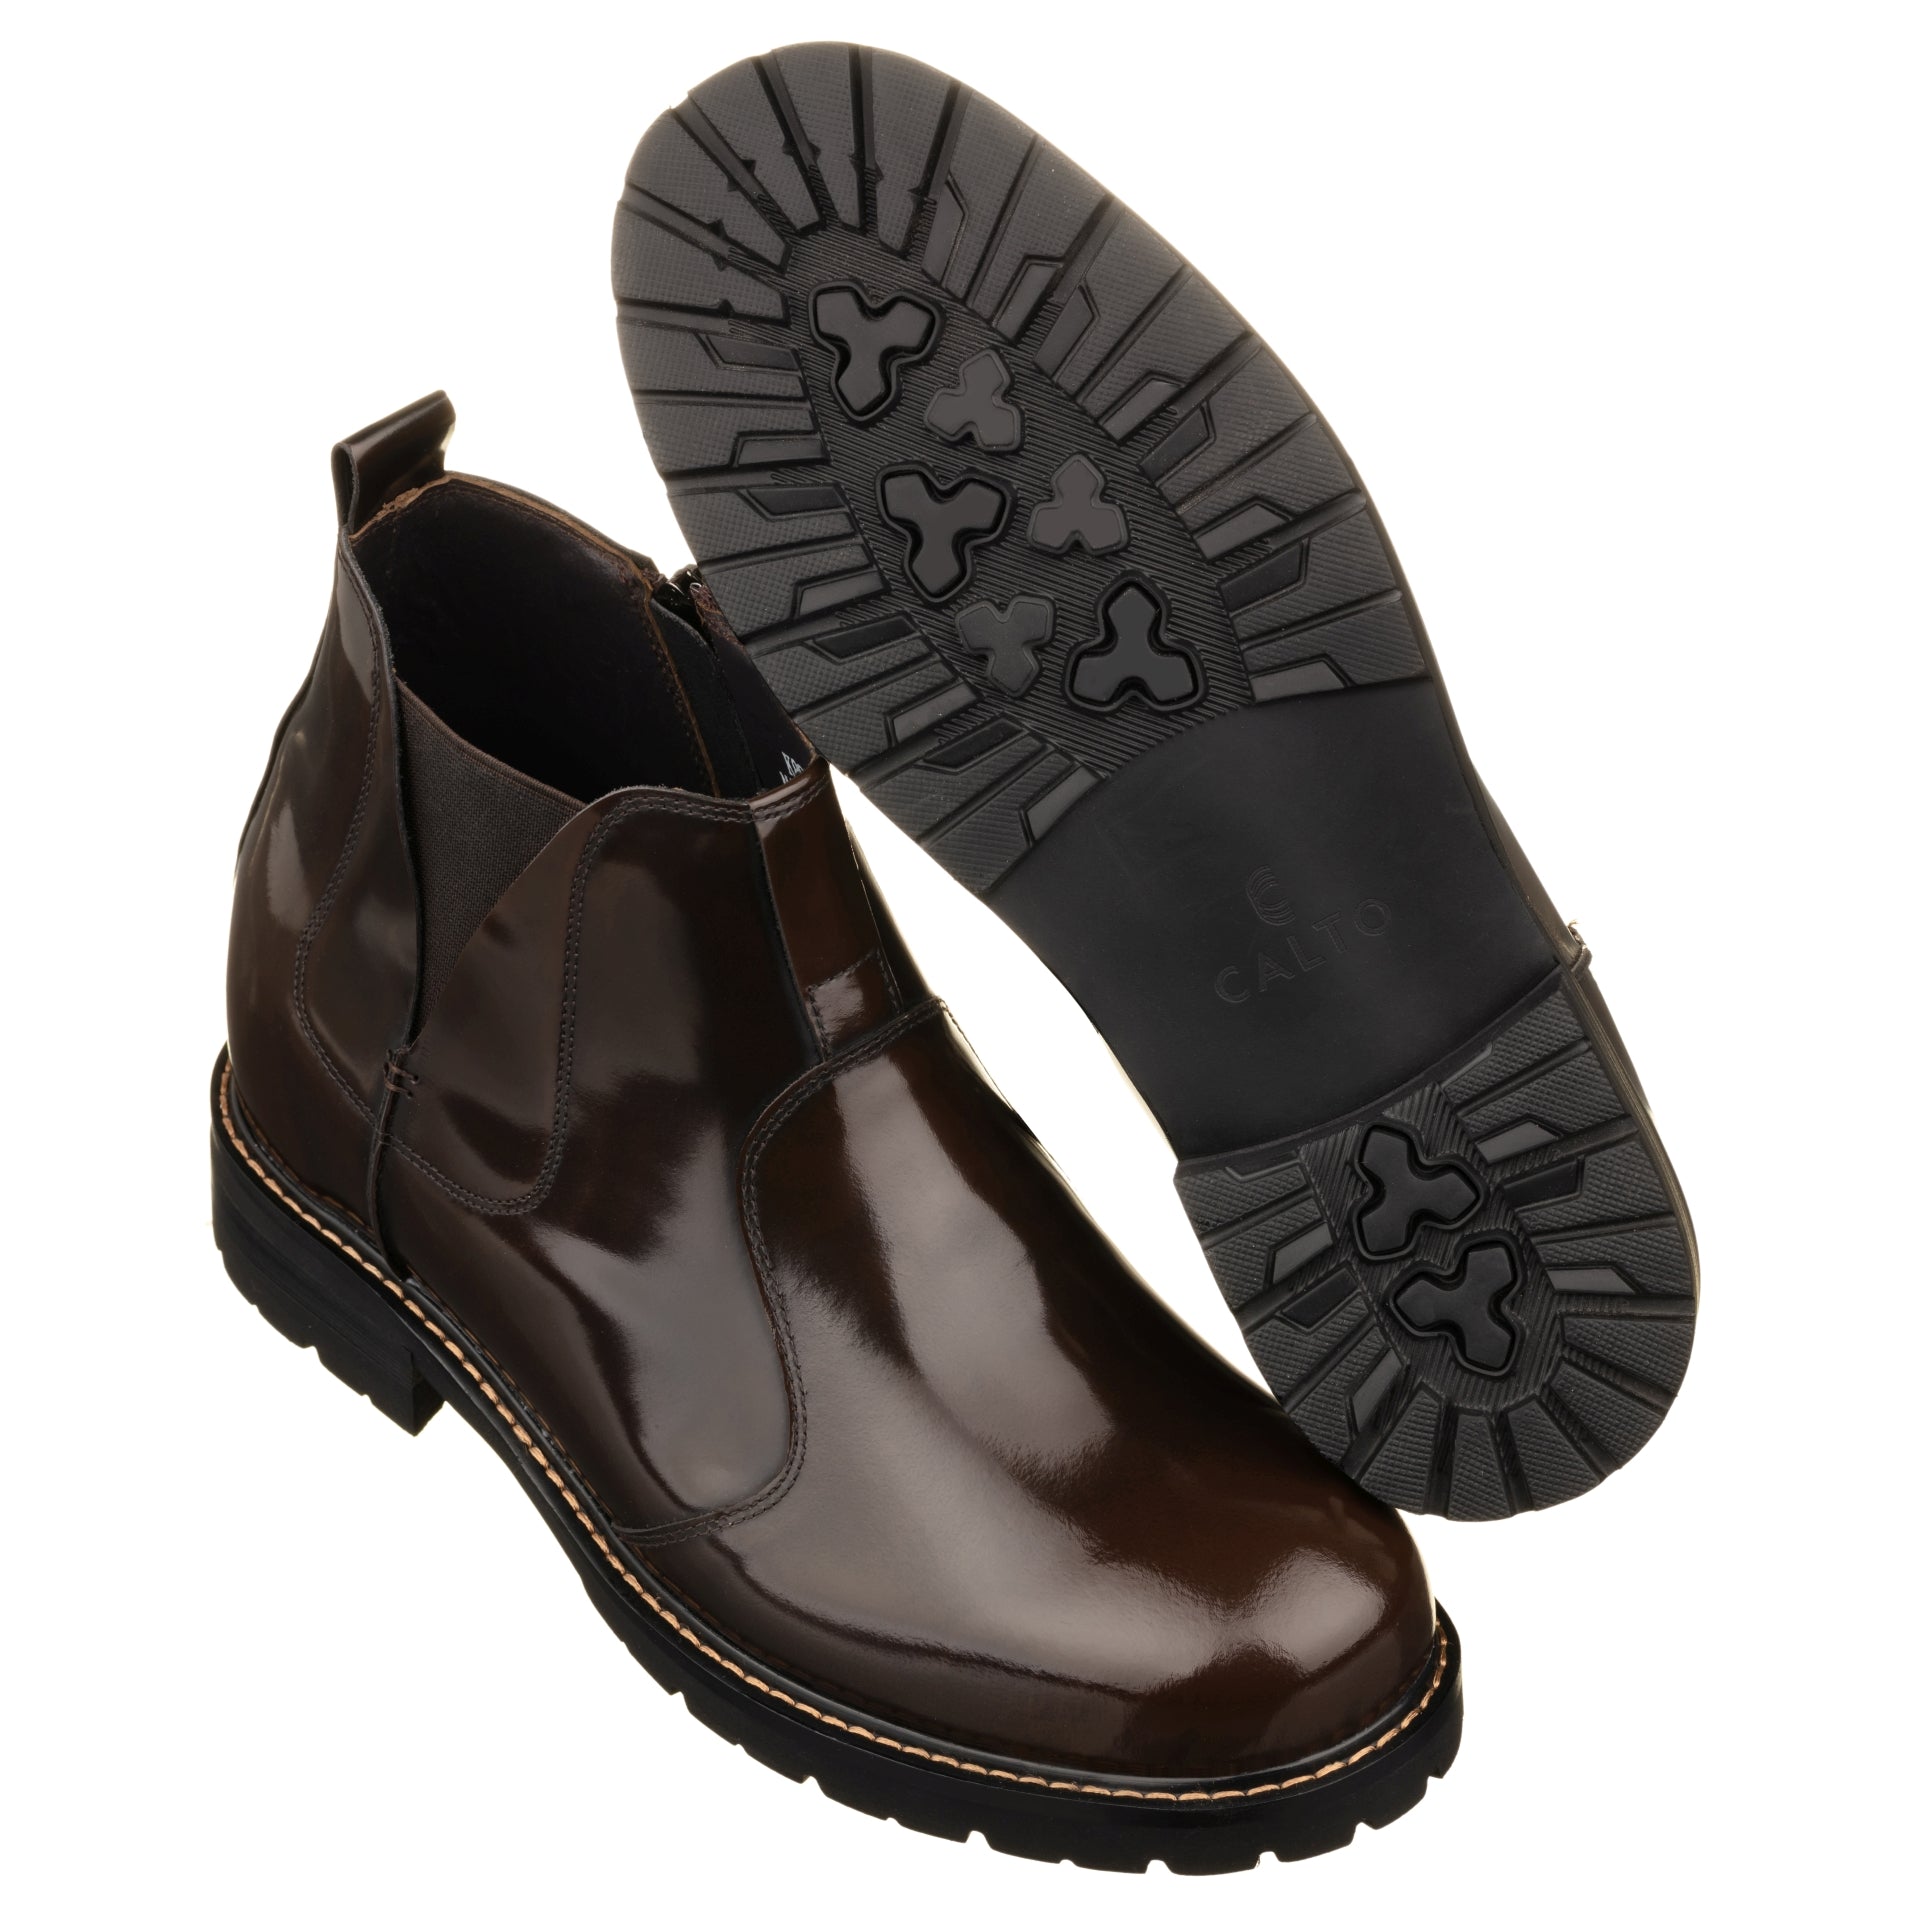 Elevator shoes height increase CALTO - K8992 - 3.6 Inches Taller (Coffee Brown) - Patent Leather Boot